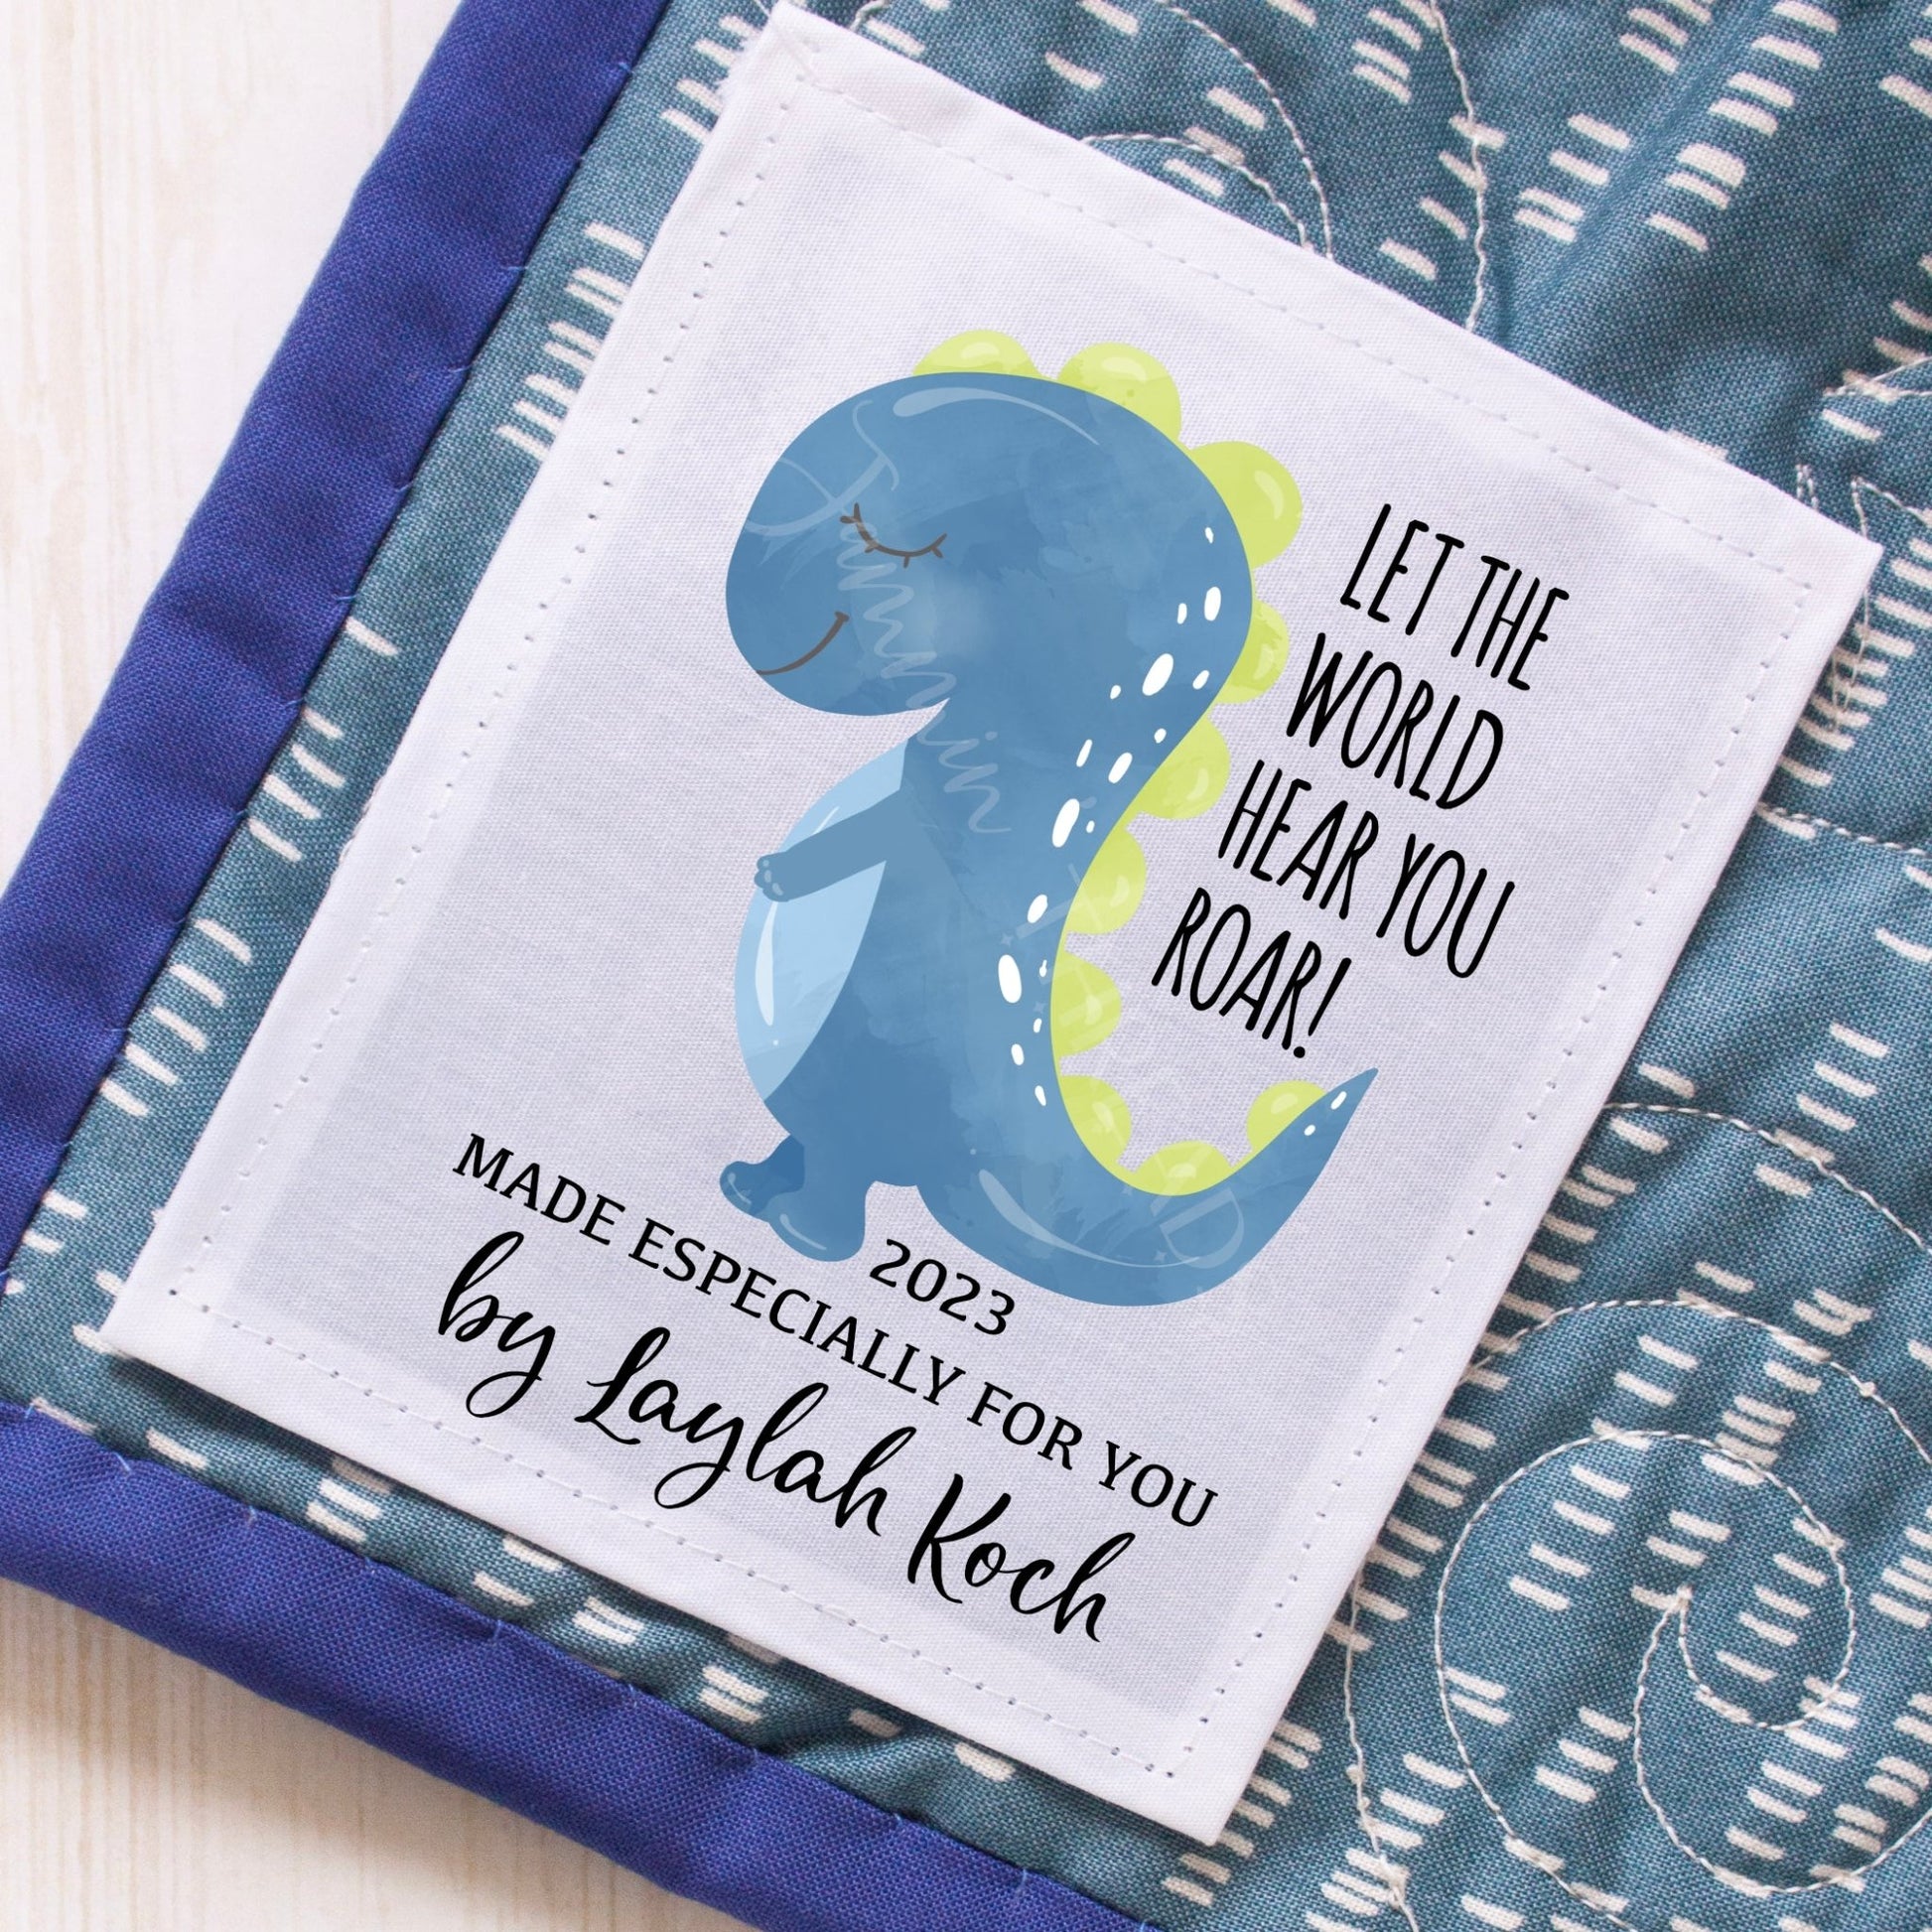 Let the World Hear You Roar. Personalized dinosaur baby quilt labels- Jammin Threads